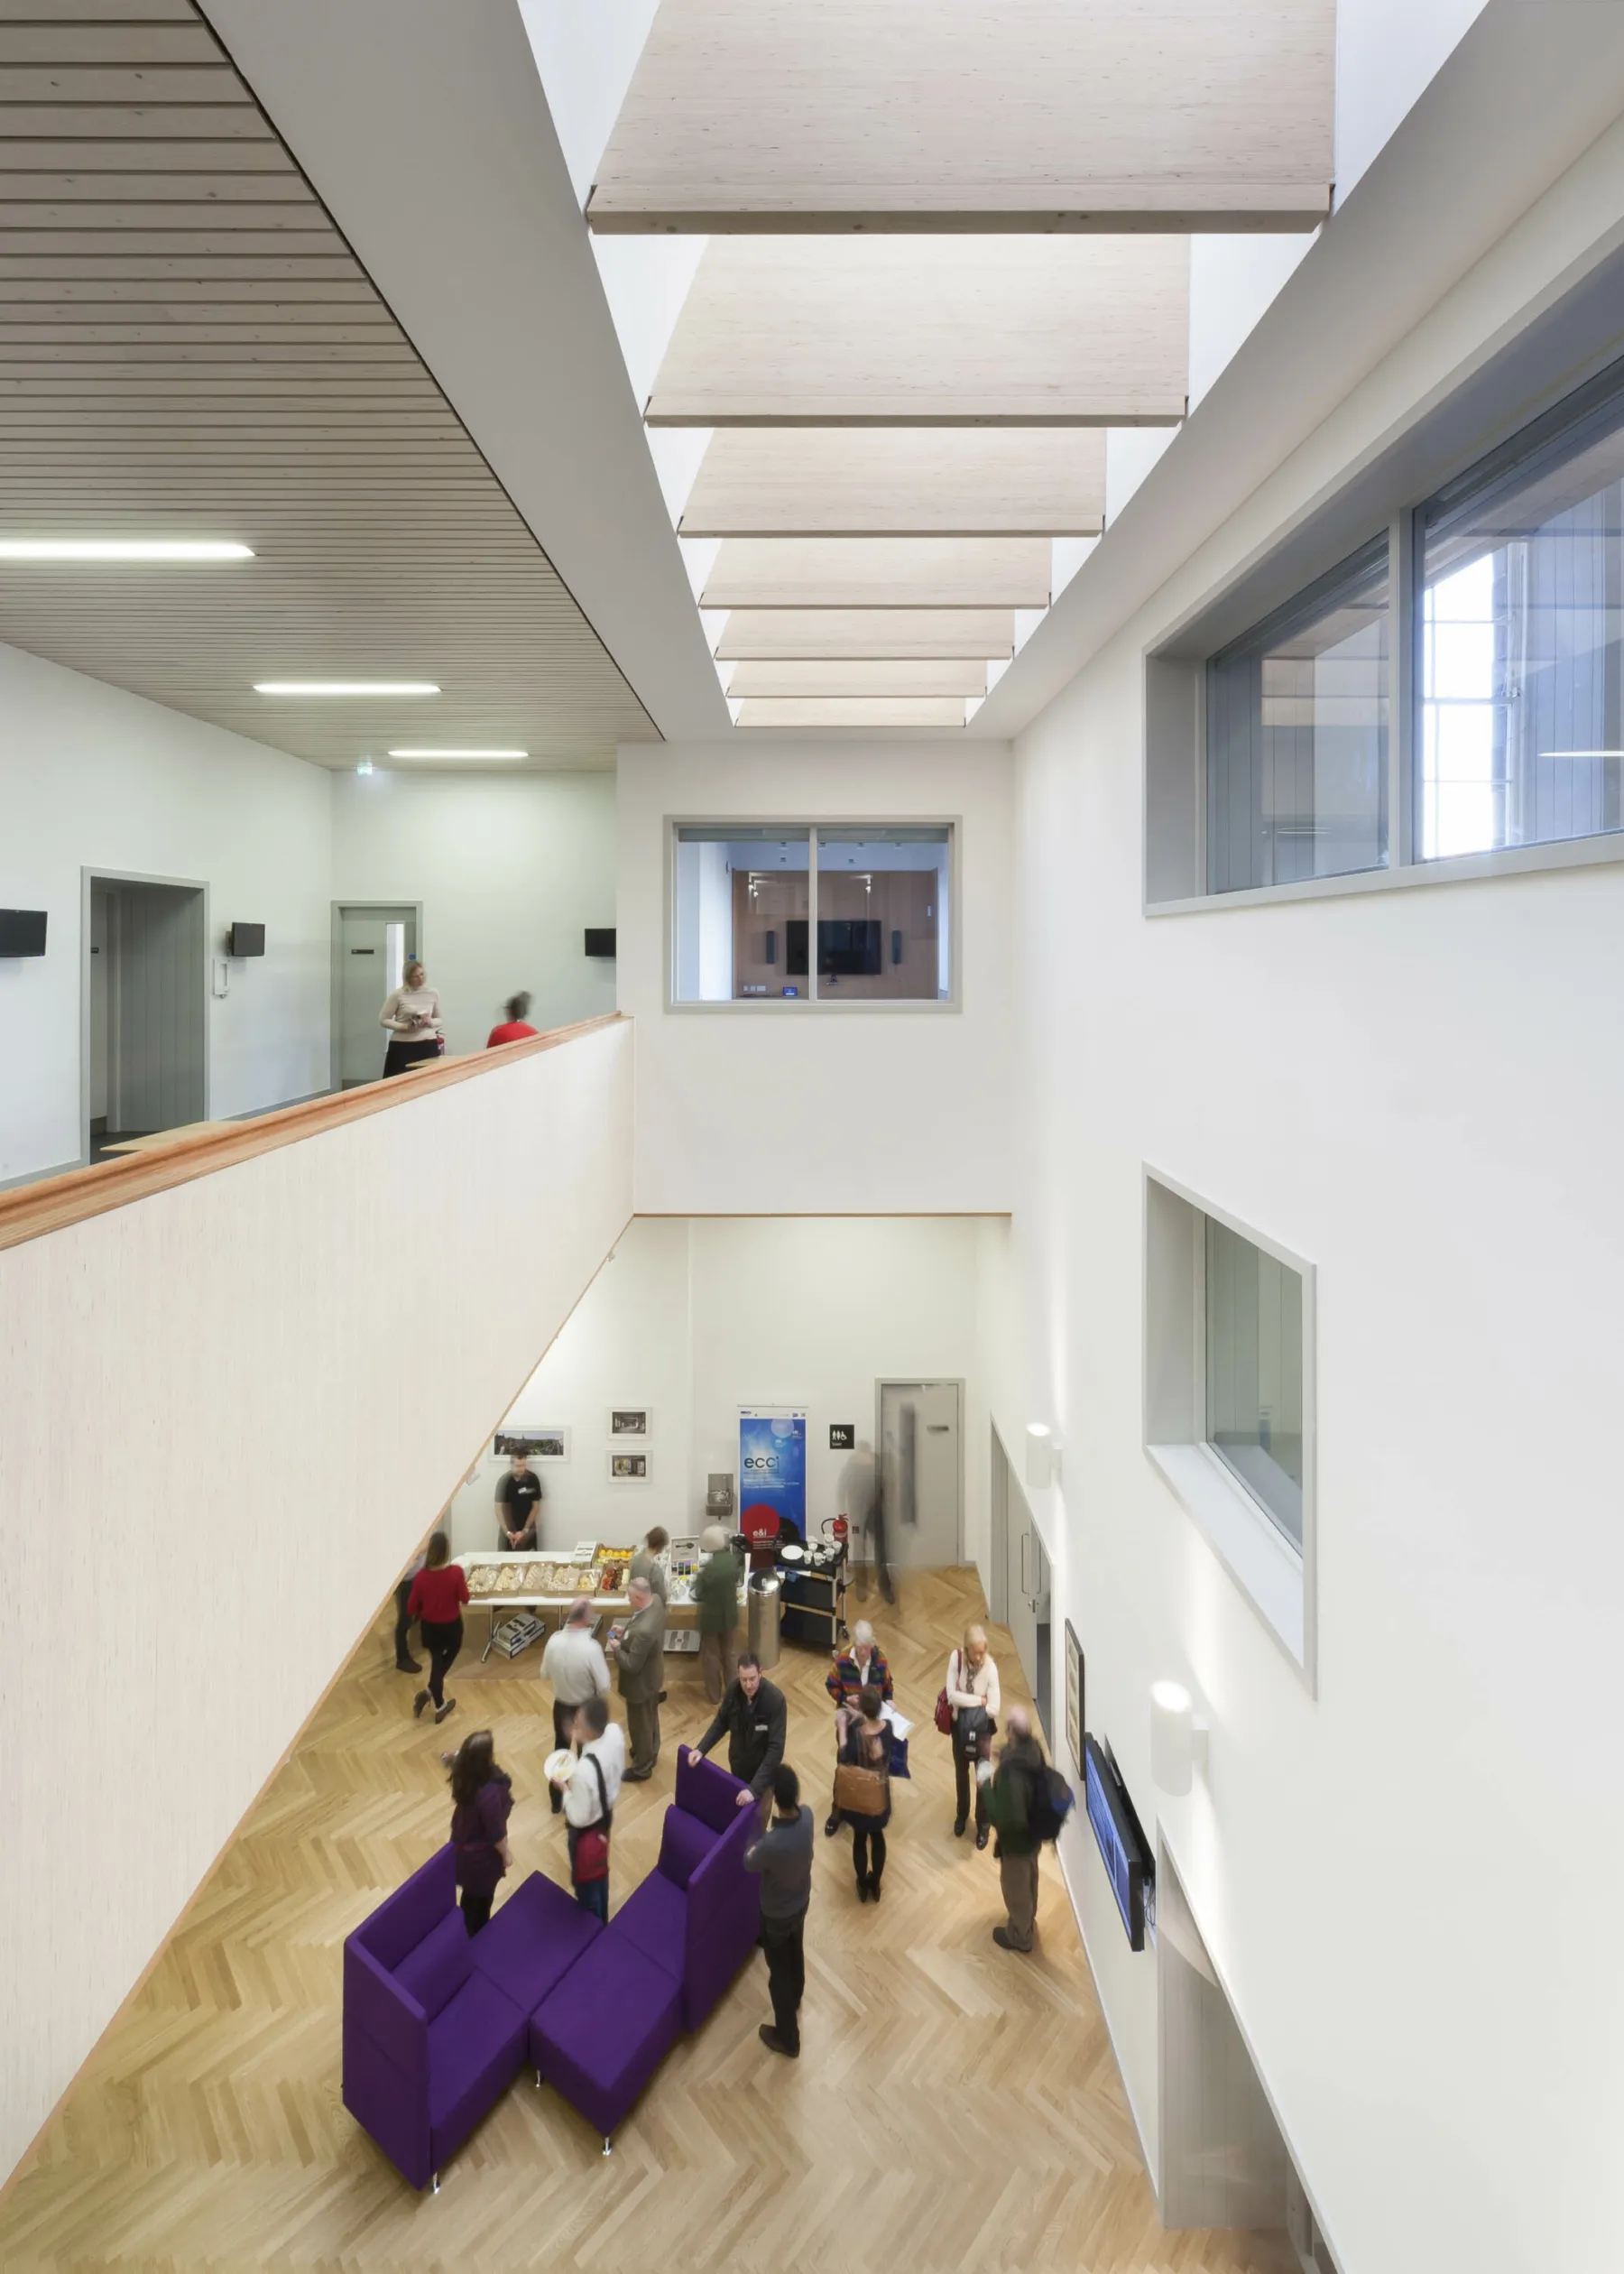 Looking down into the central atrium at the Edinburgh Climate Change Institute from the first floor gallery. A group takes part in a reception with refreshments. The floors are herringbone timber, walls are white and ceiling and skylights have timber detailing. It is a brightly lit space.